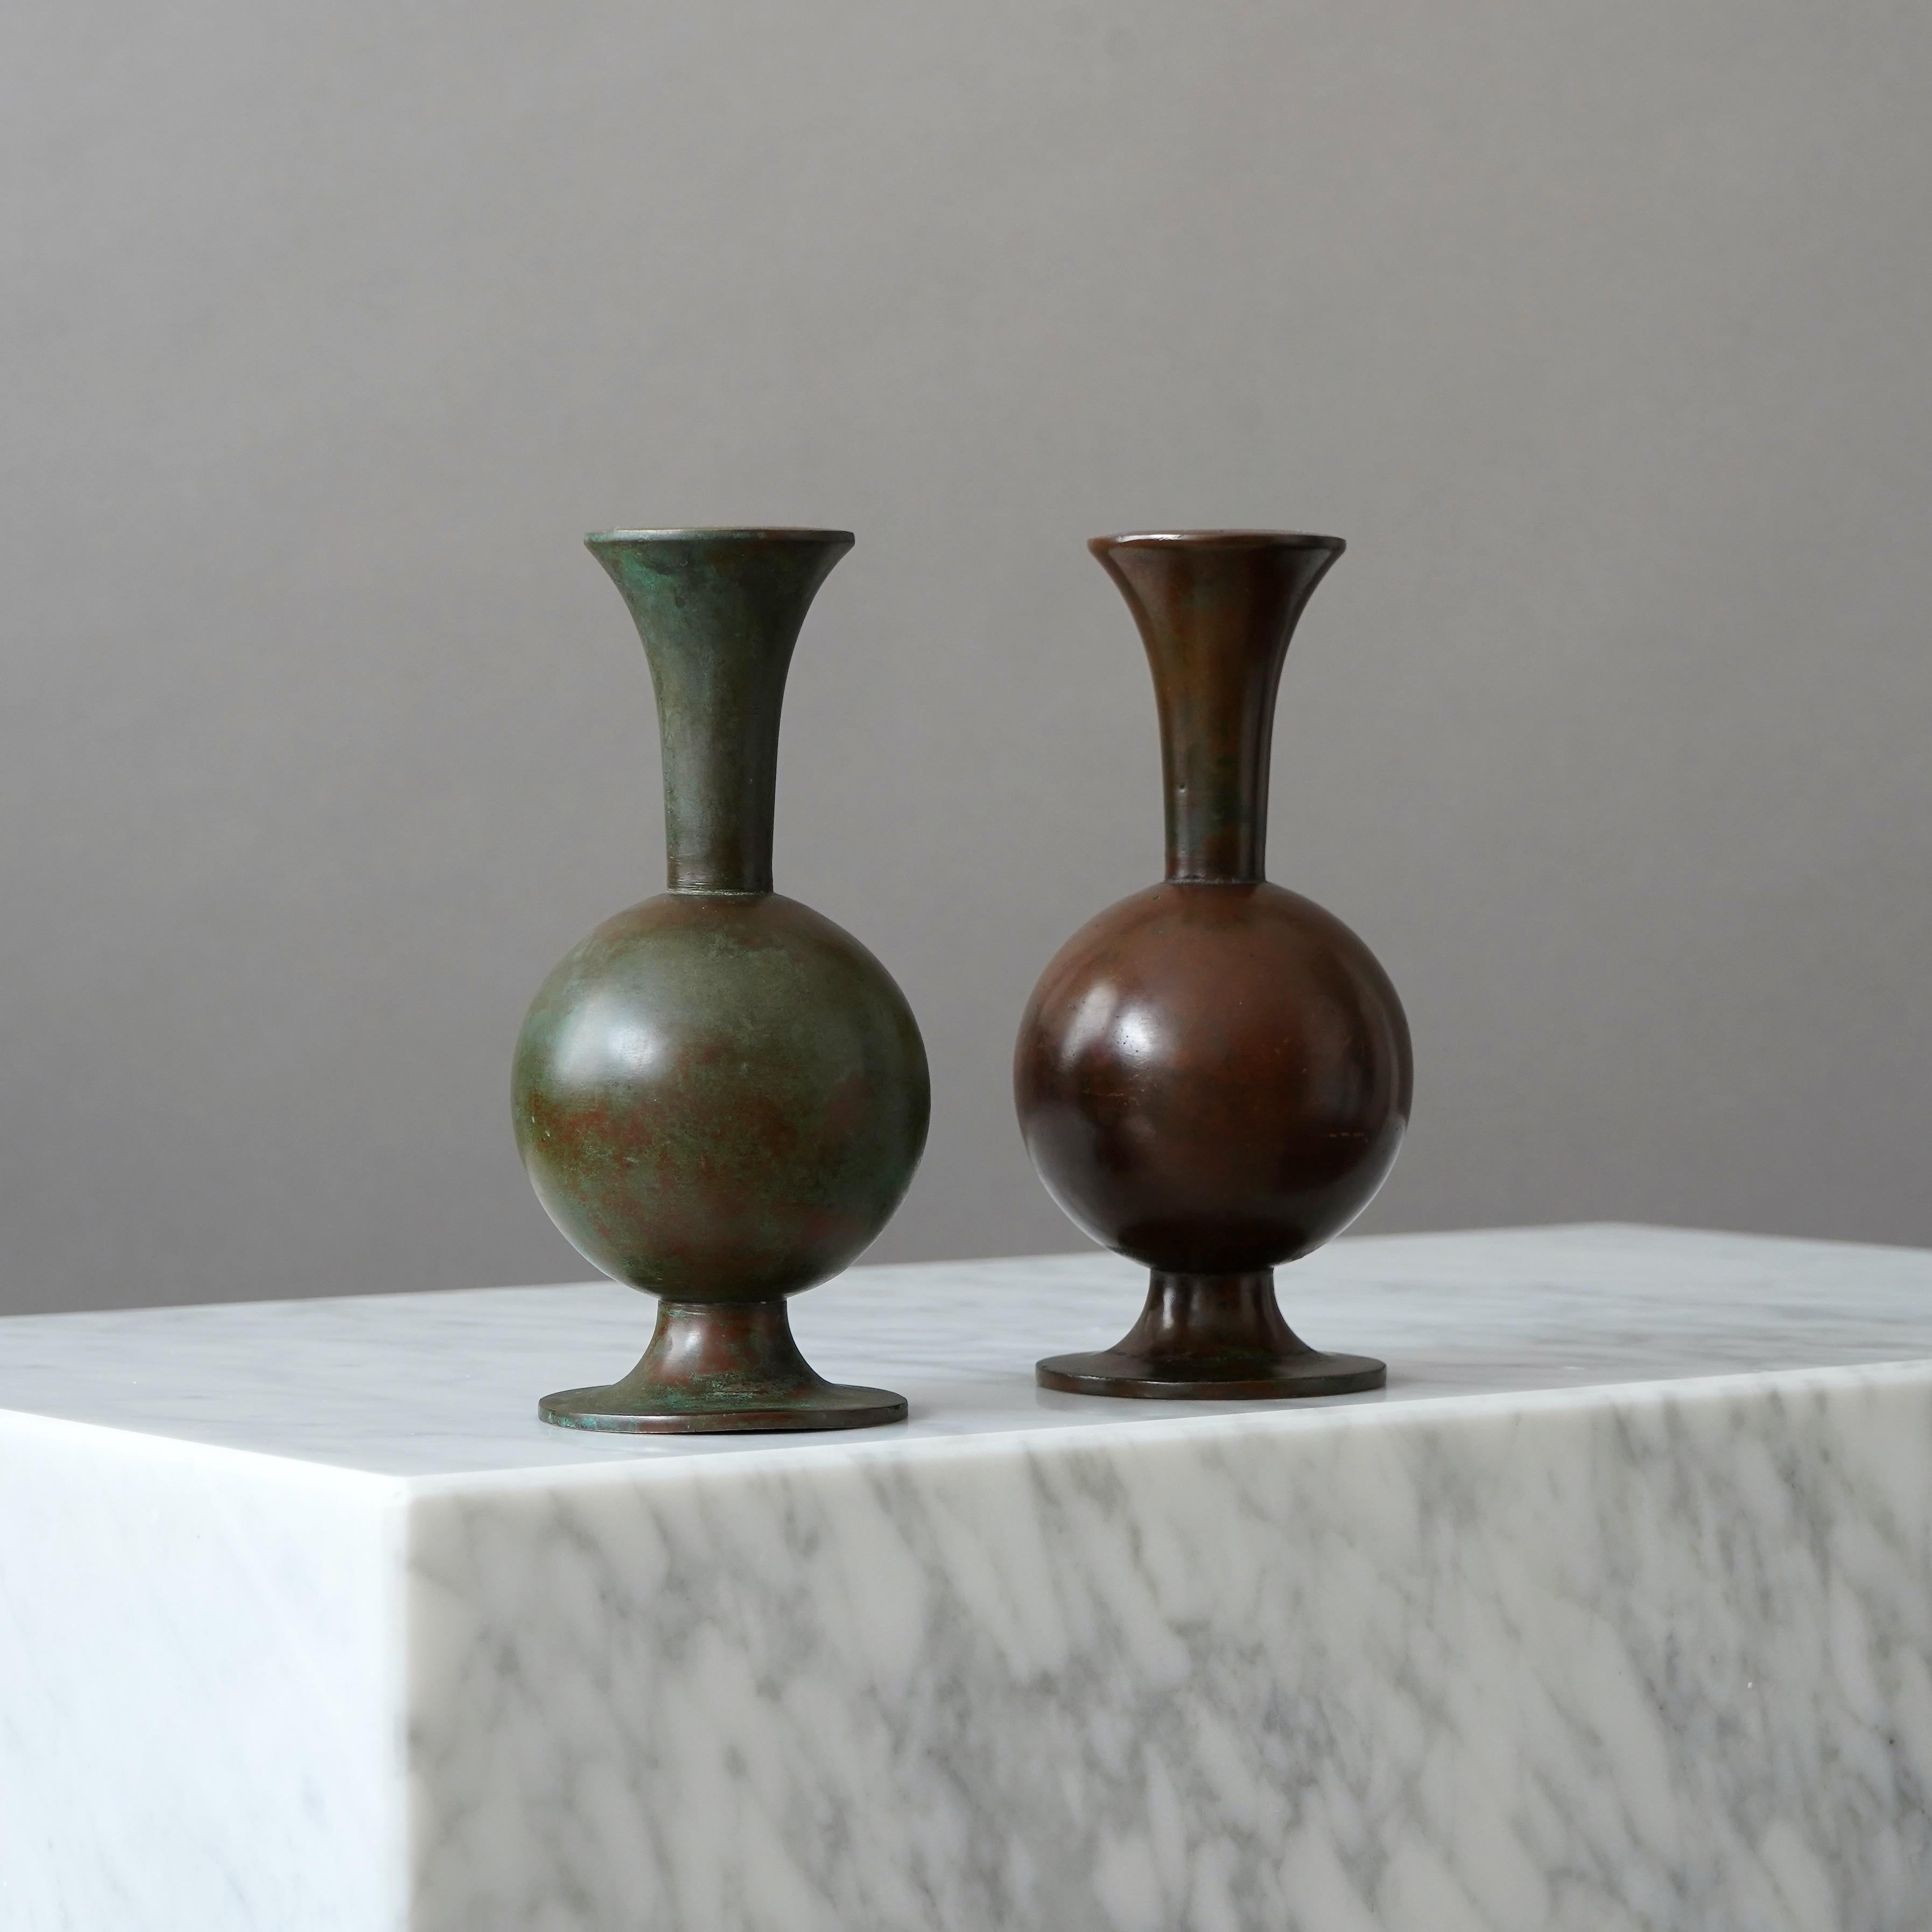 A set of beautiful bronze vases with amazing patina. Designed by Sune Bäckström in Malmoe, Sweden, 1920s.  

Great condition. The colors differ slightly.
Stamped 'BRONS', model number '9020' and signature 'Sune Bäckström'.

Produced by Einar